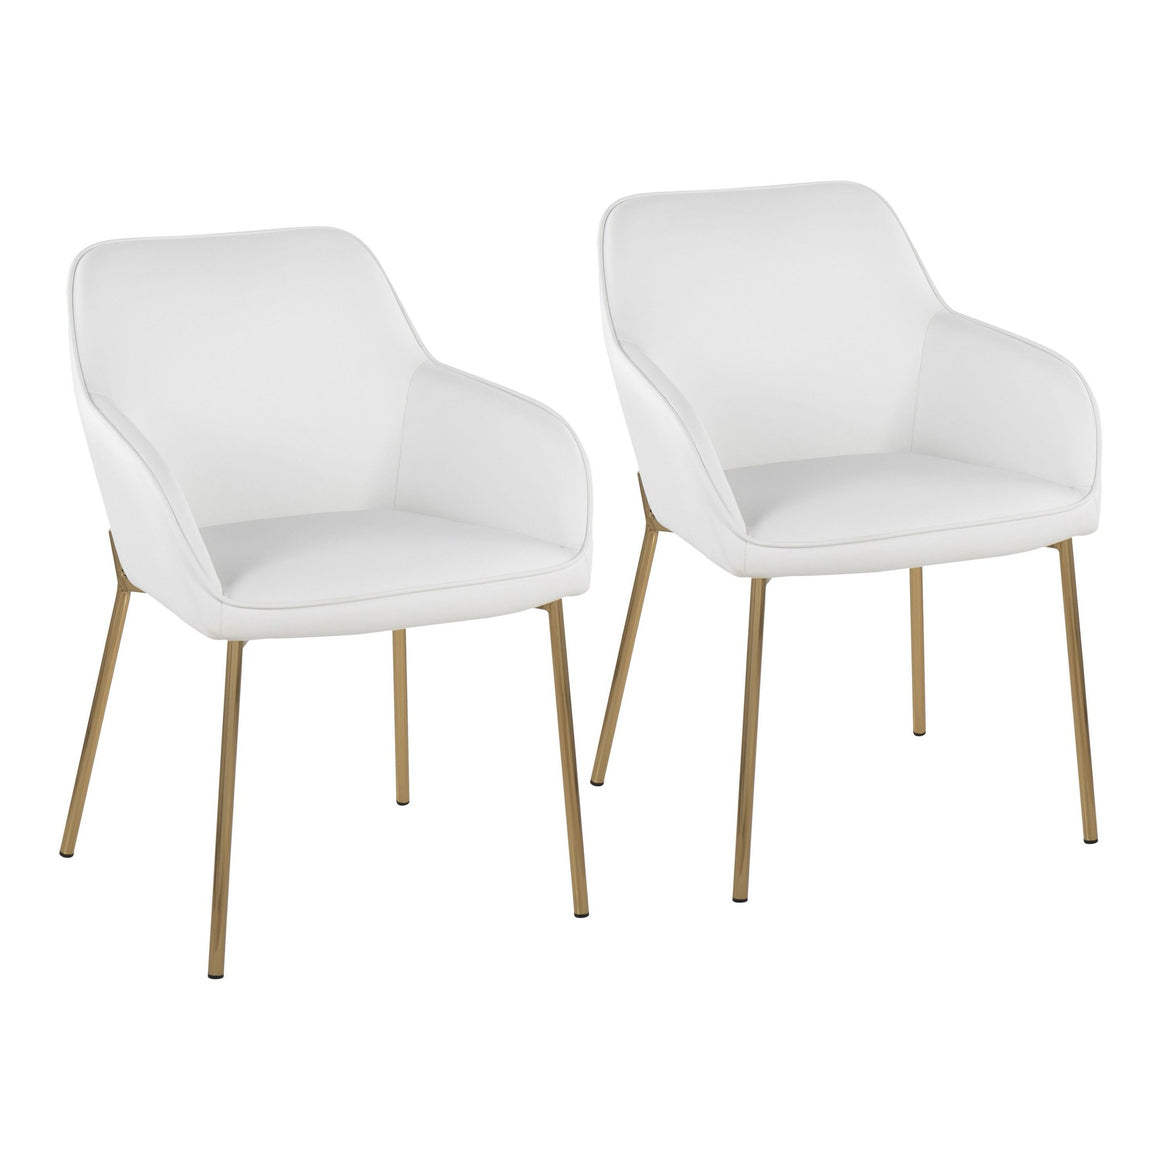 Daniella Contemporary Dining Chair in Gold Steel and White Faux Leather by LumiSource - Set of 2